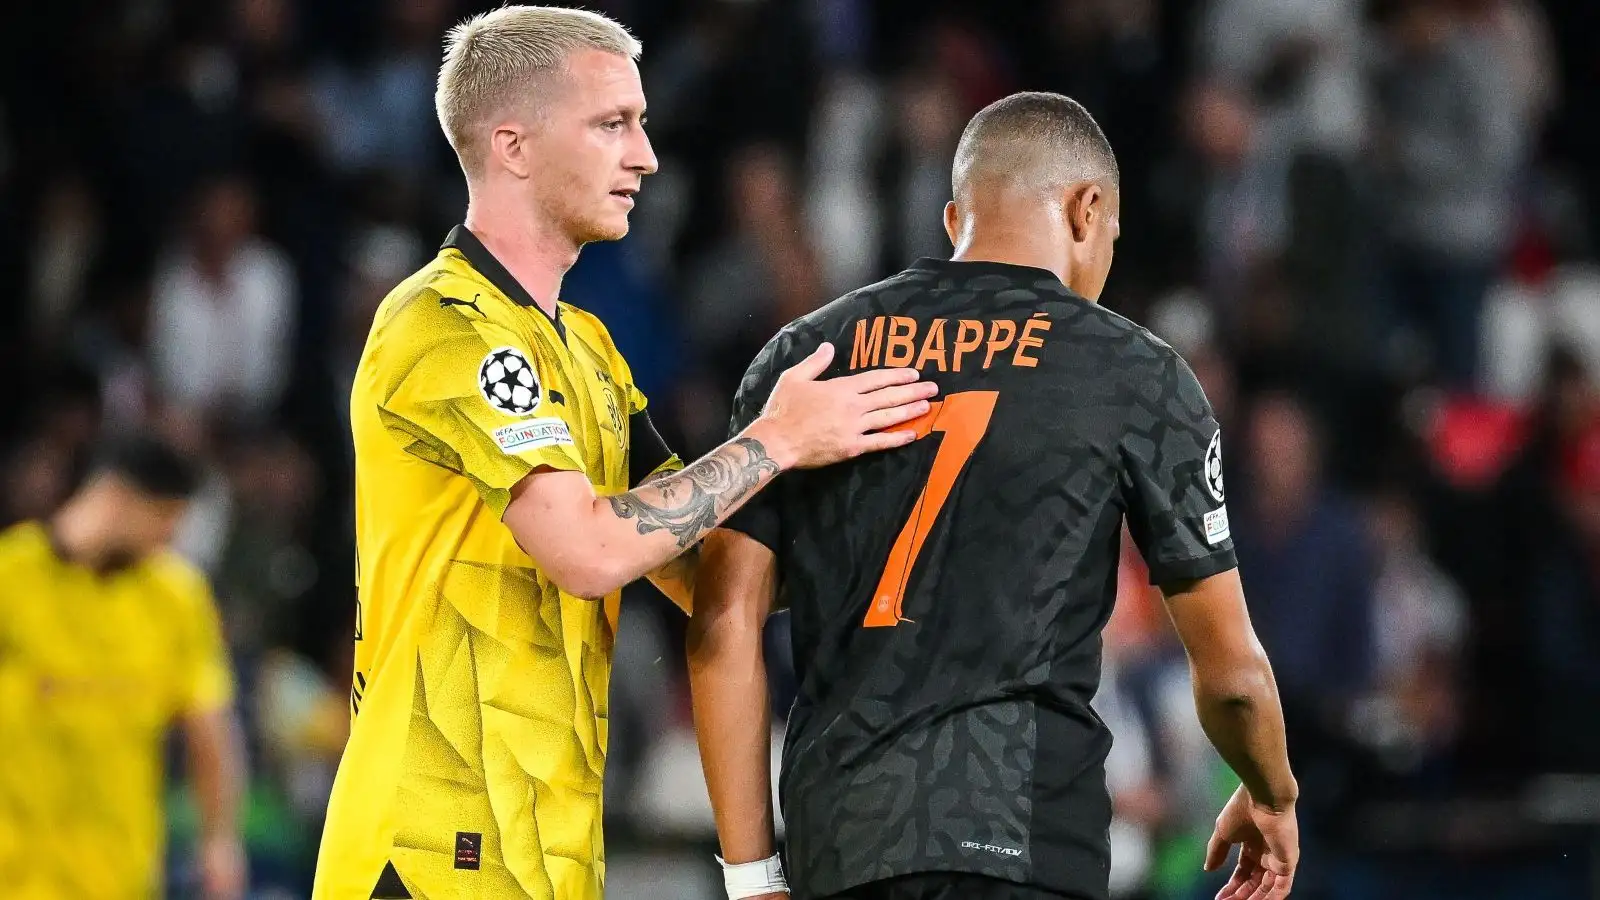 Reported West Pork target Marco Reus by means of Kylian Mbappe after a match.